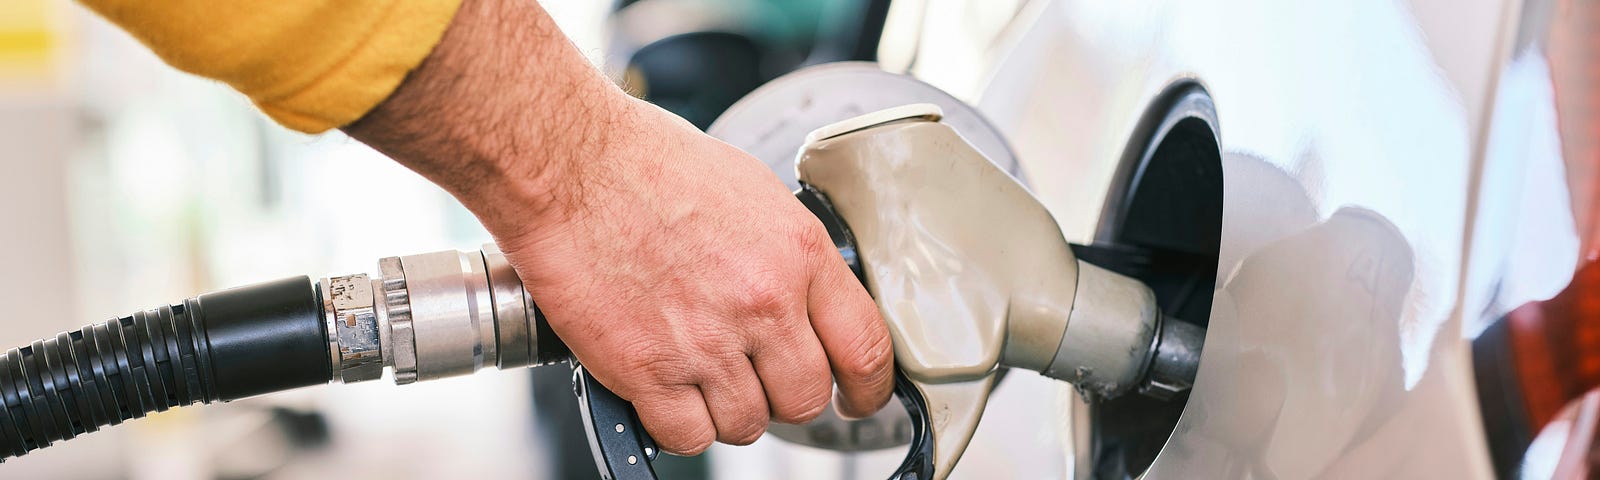 Closeup of a man’s hand holding a gas nozzle, filling a white car with fuel.